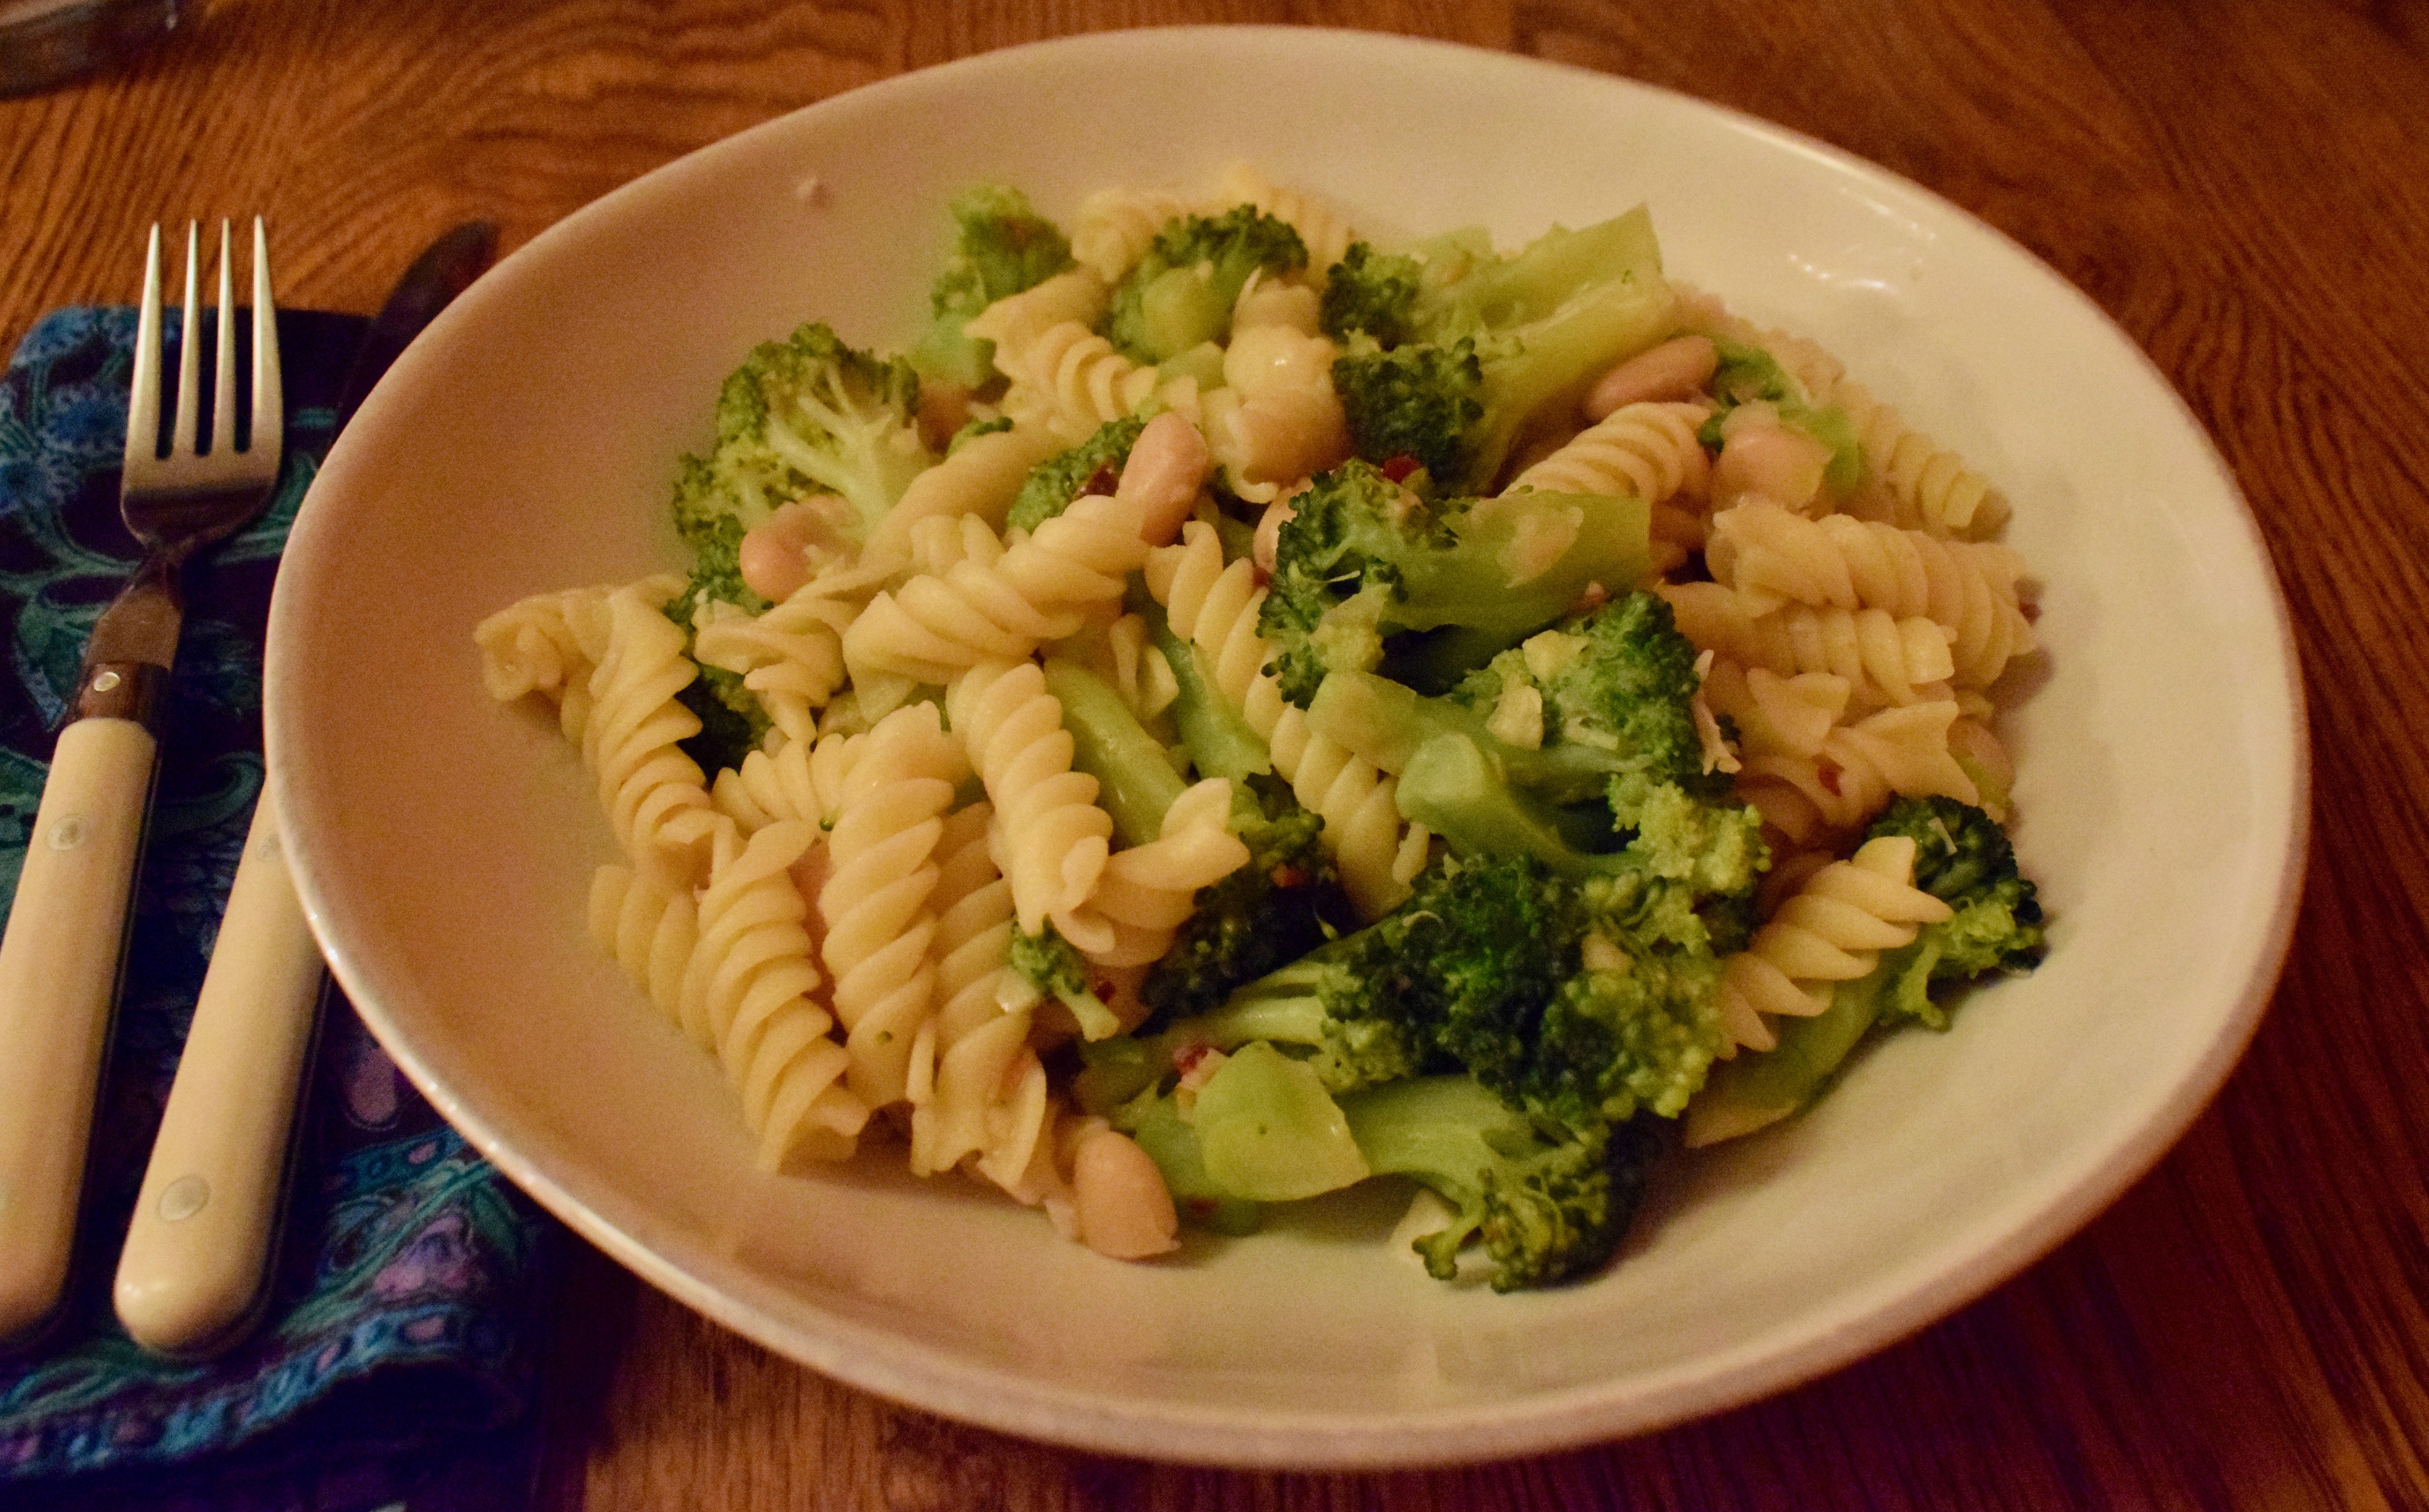 Place Setting with Spicy Broccoli and White Bean Pasta